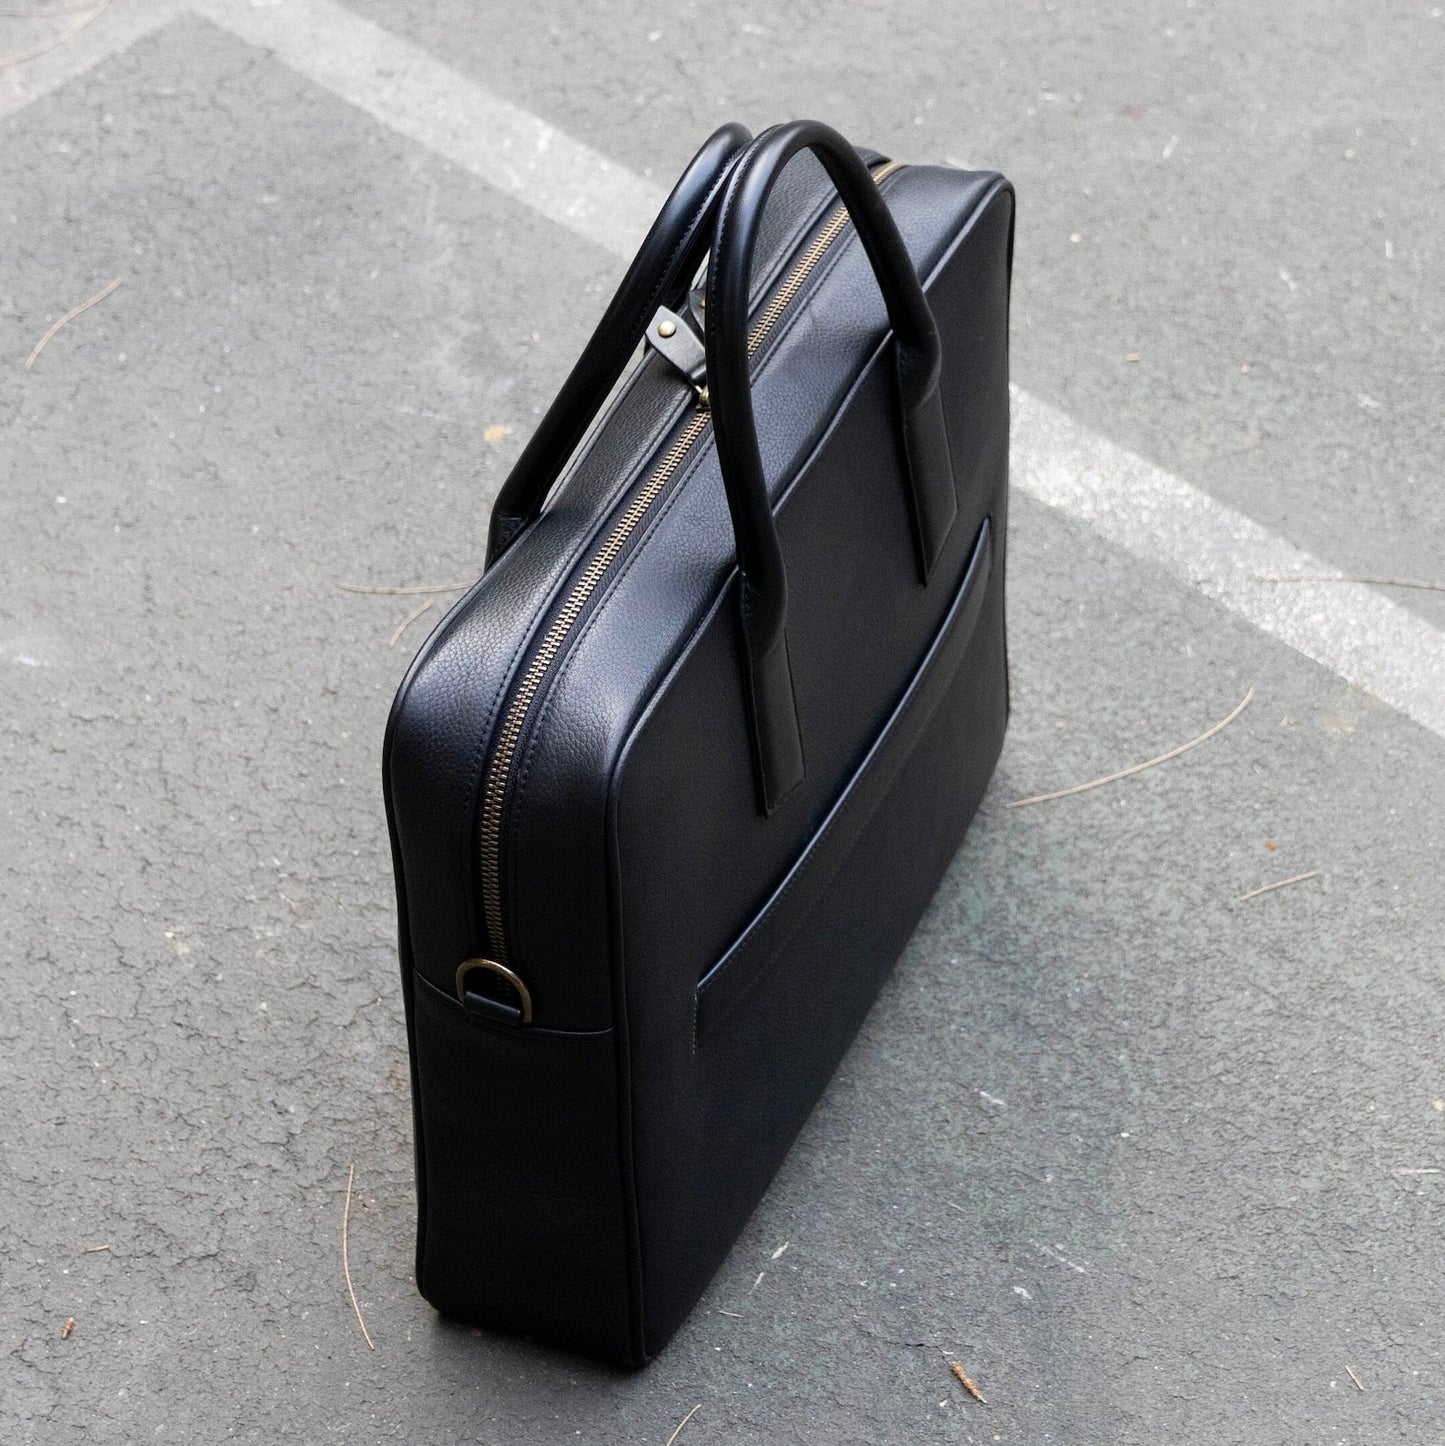 Black Leather Briefcase Bag With Trolley Sleeve